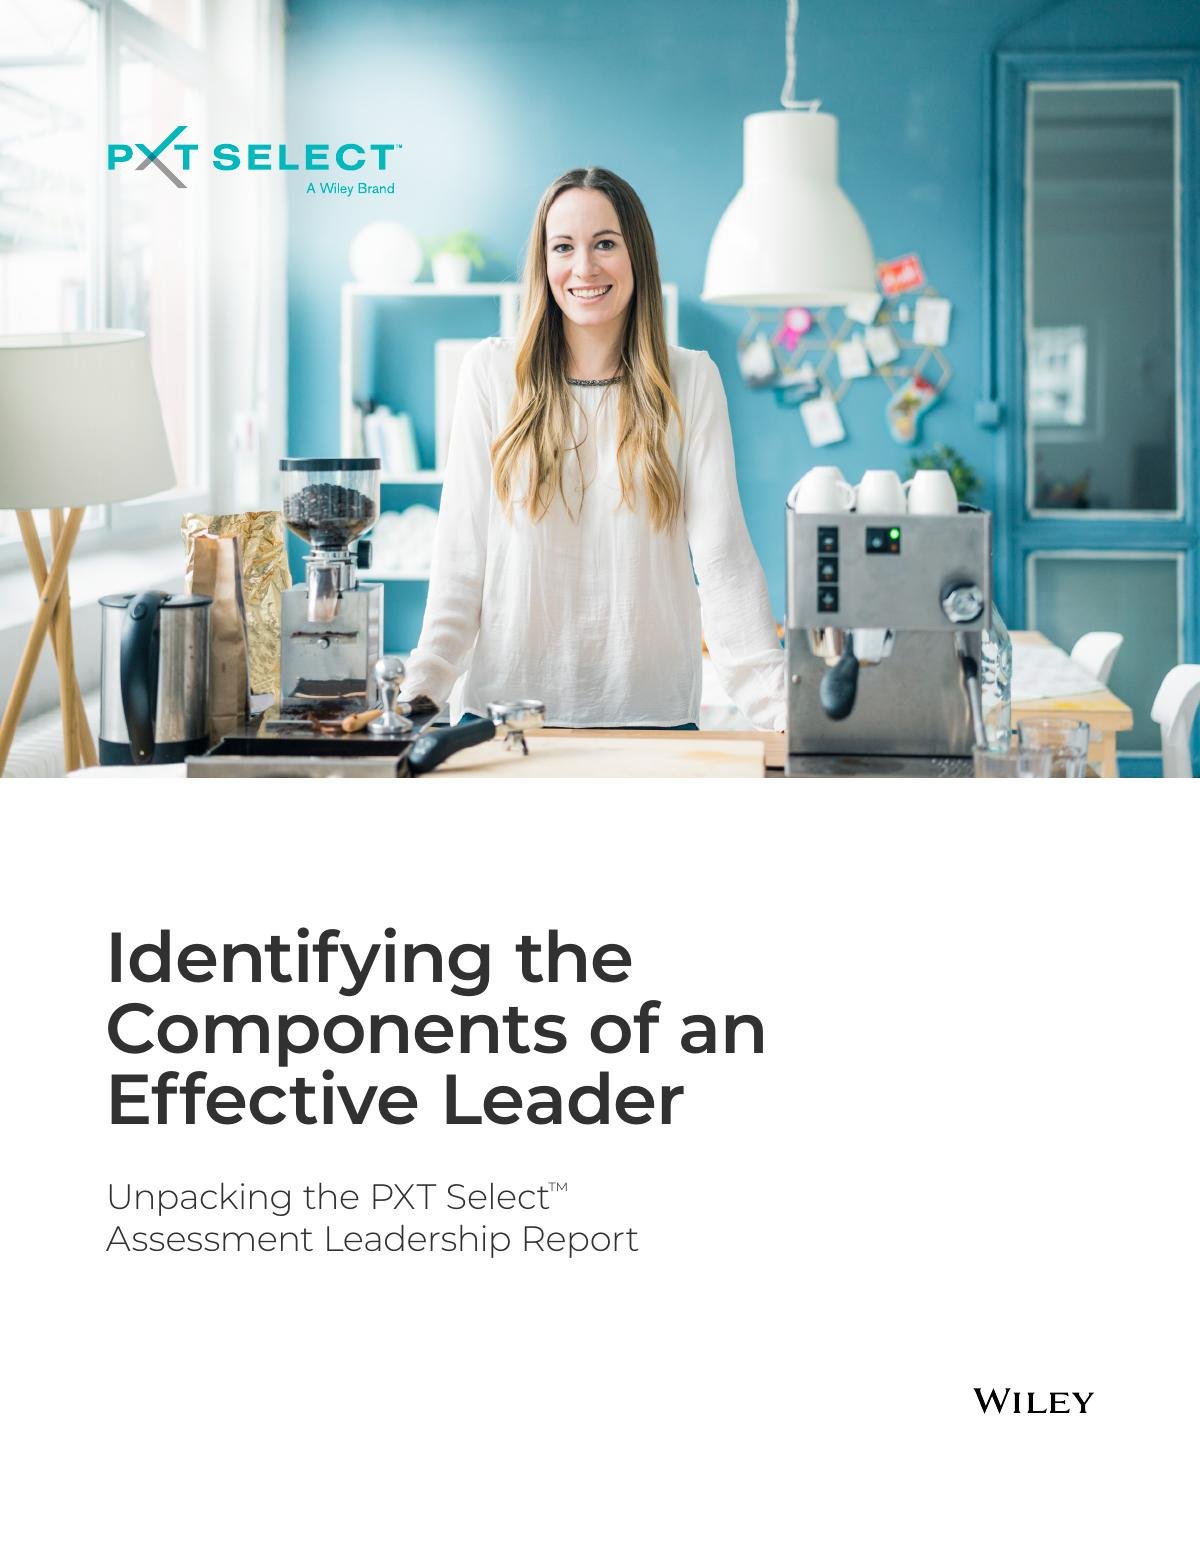 Identifying the Components of an Effective Leader